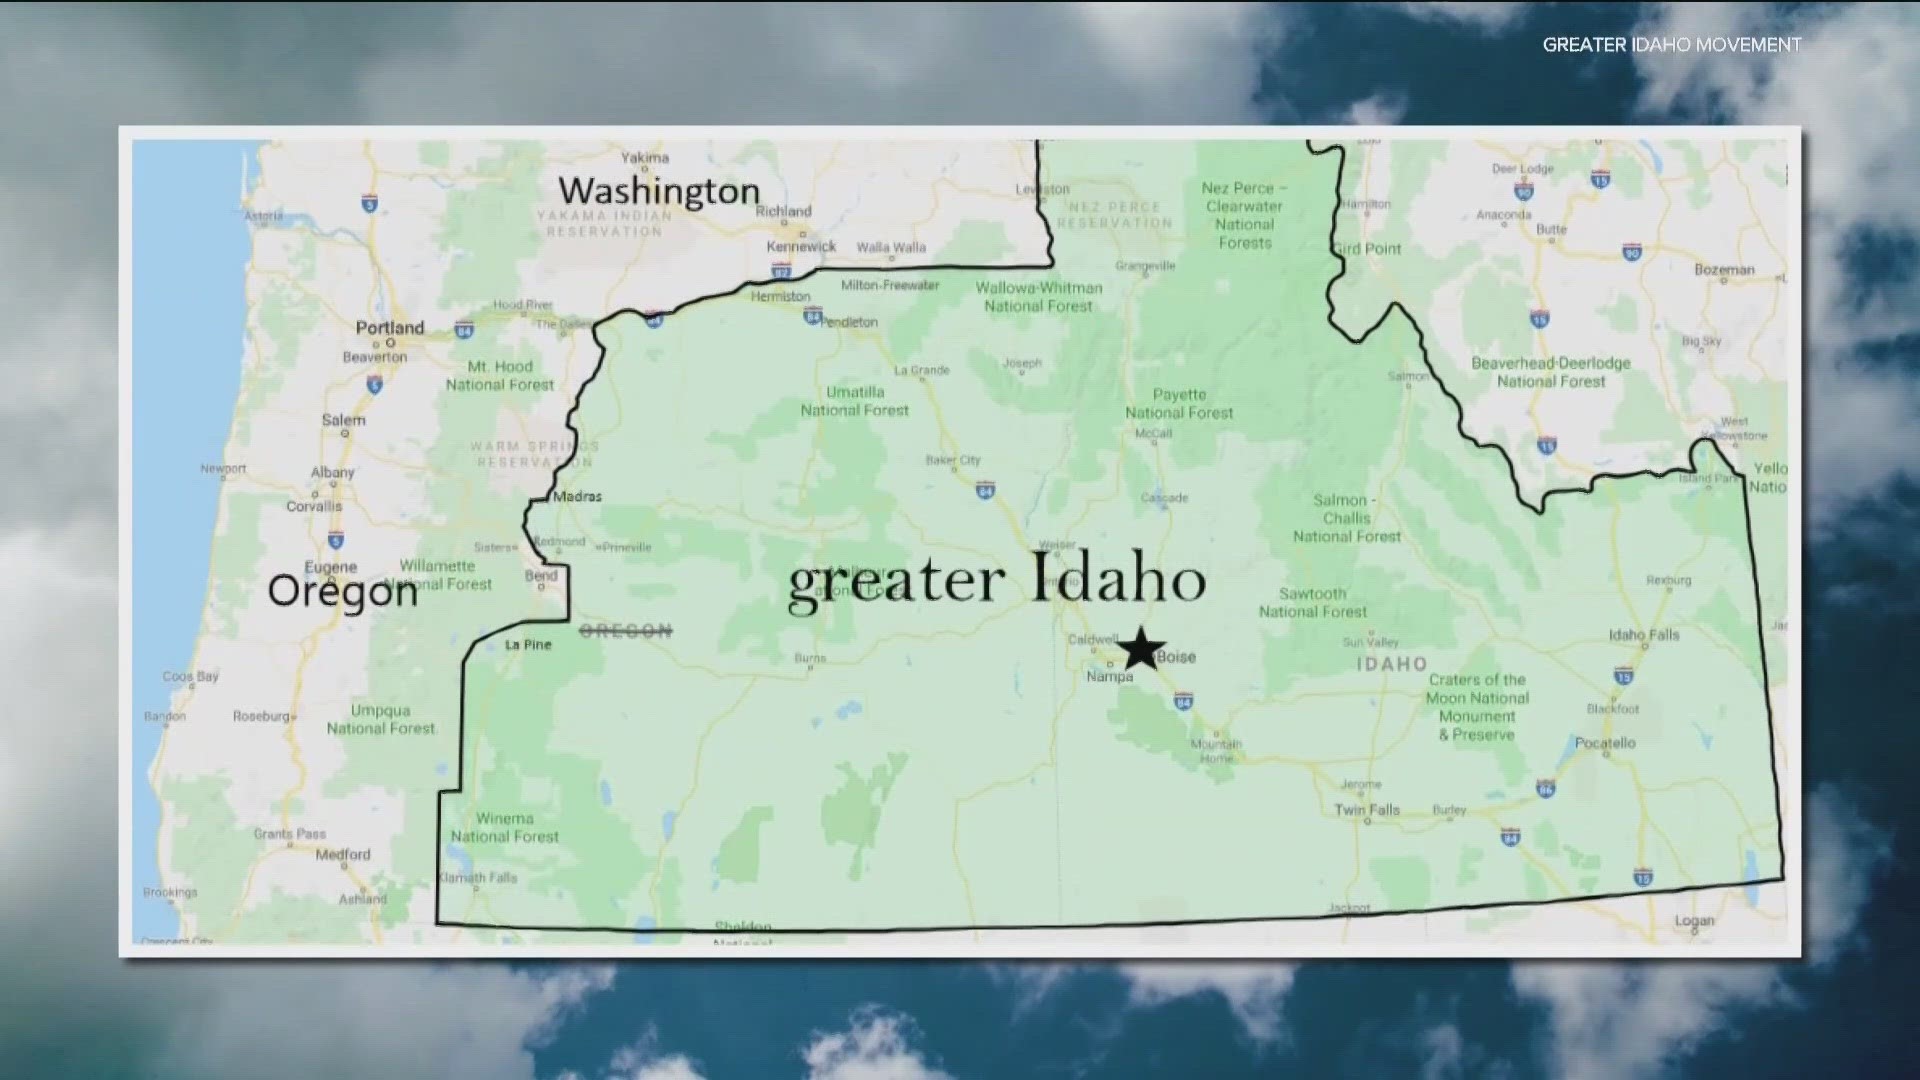 Sheriff Todd McKinley is on the fence about "Greater Idaho," but he feels that Oregon's urban population centers have pushed failed policies on the people he serves.